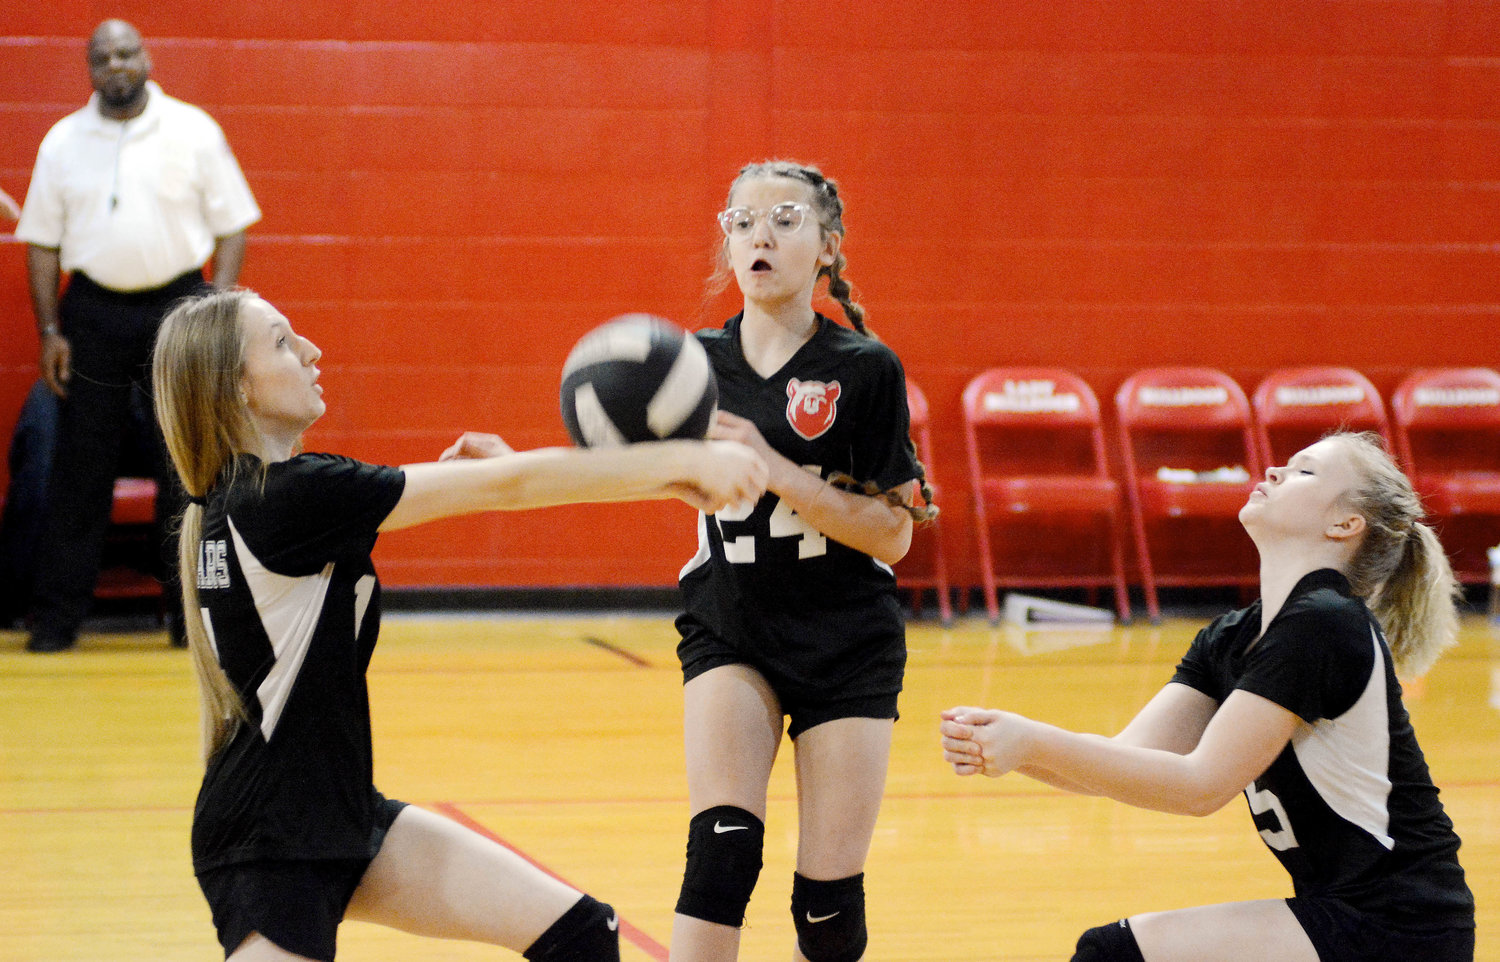 Cloie Schneider, Kyrie Rhoads and Lorraine Smith (from left) converge on a volleyball during warm ups prior to seventh-grade volleyball action Friday night at Dixon between the Bland Lady Bears and host Lady Bulldogs.